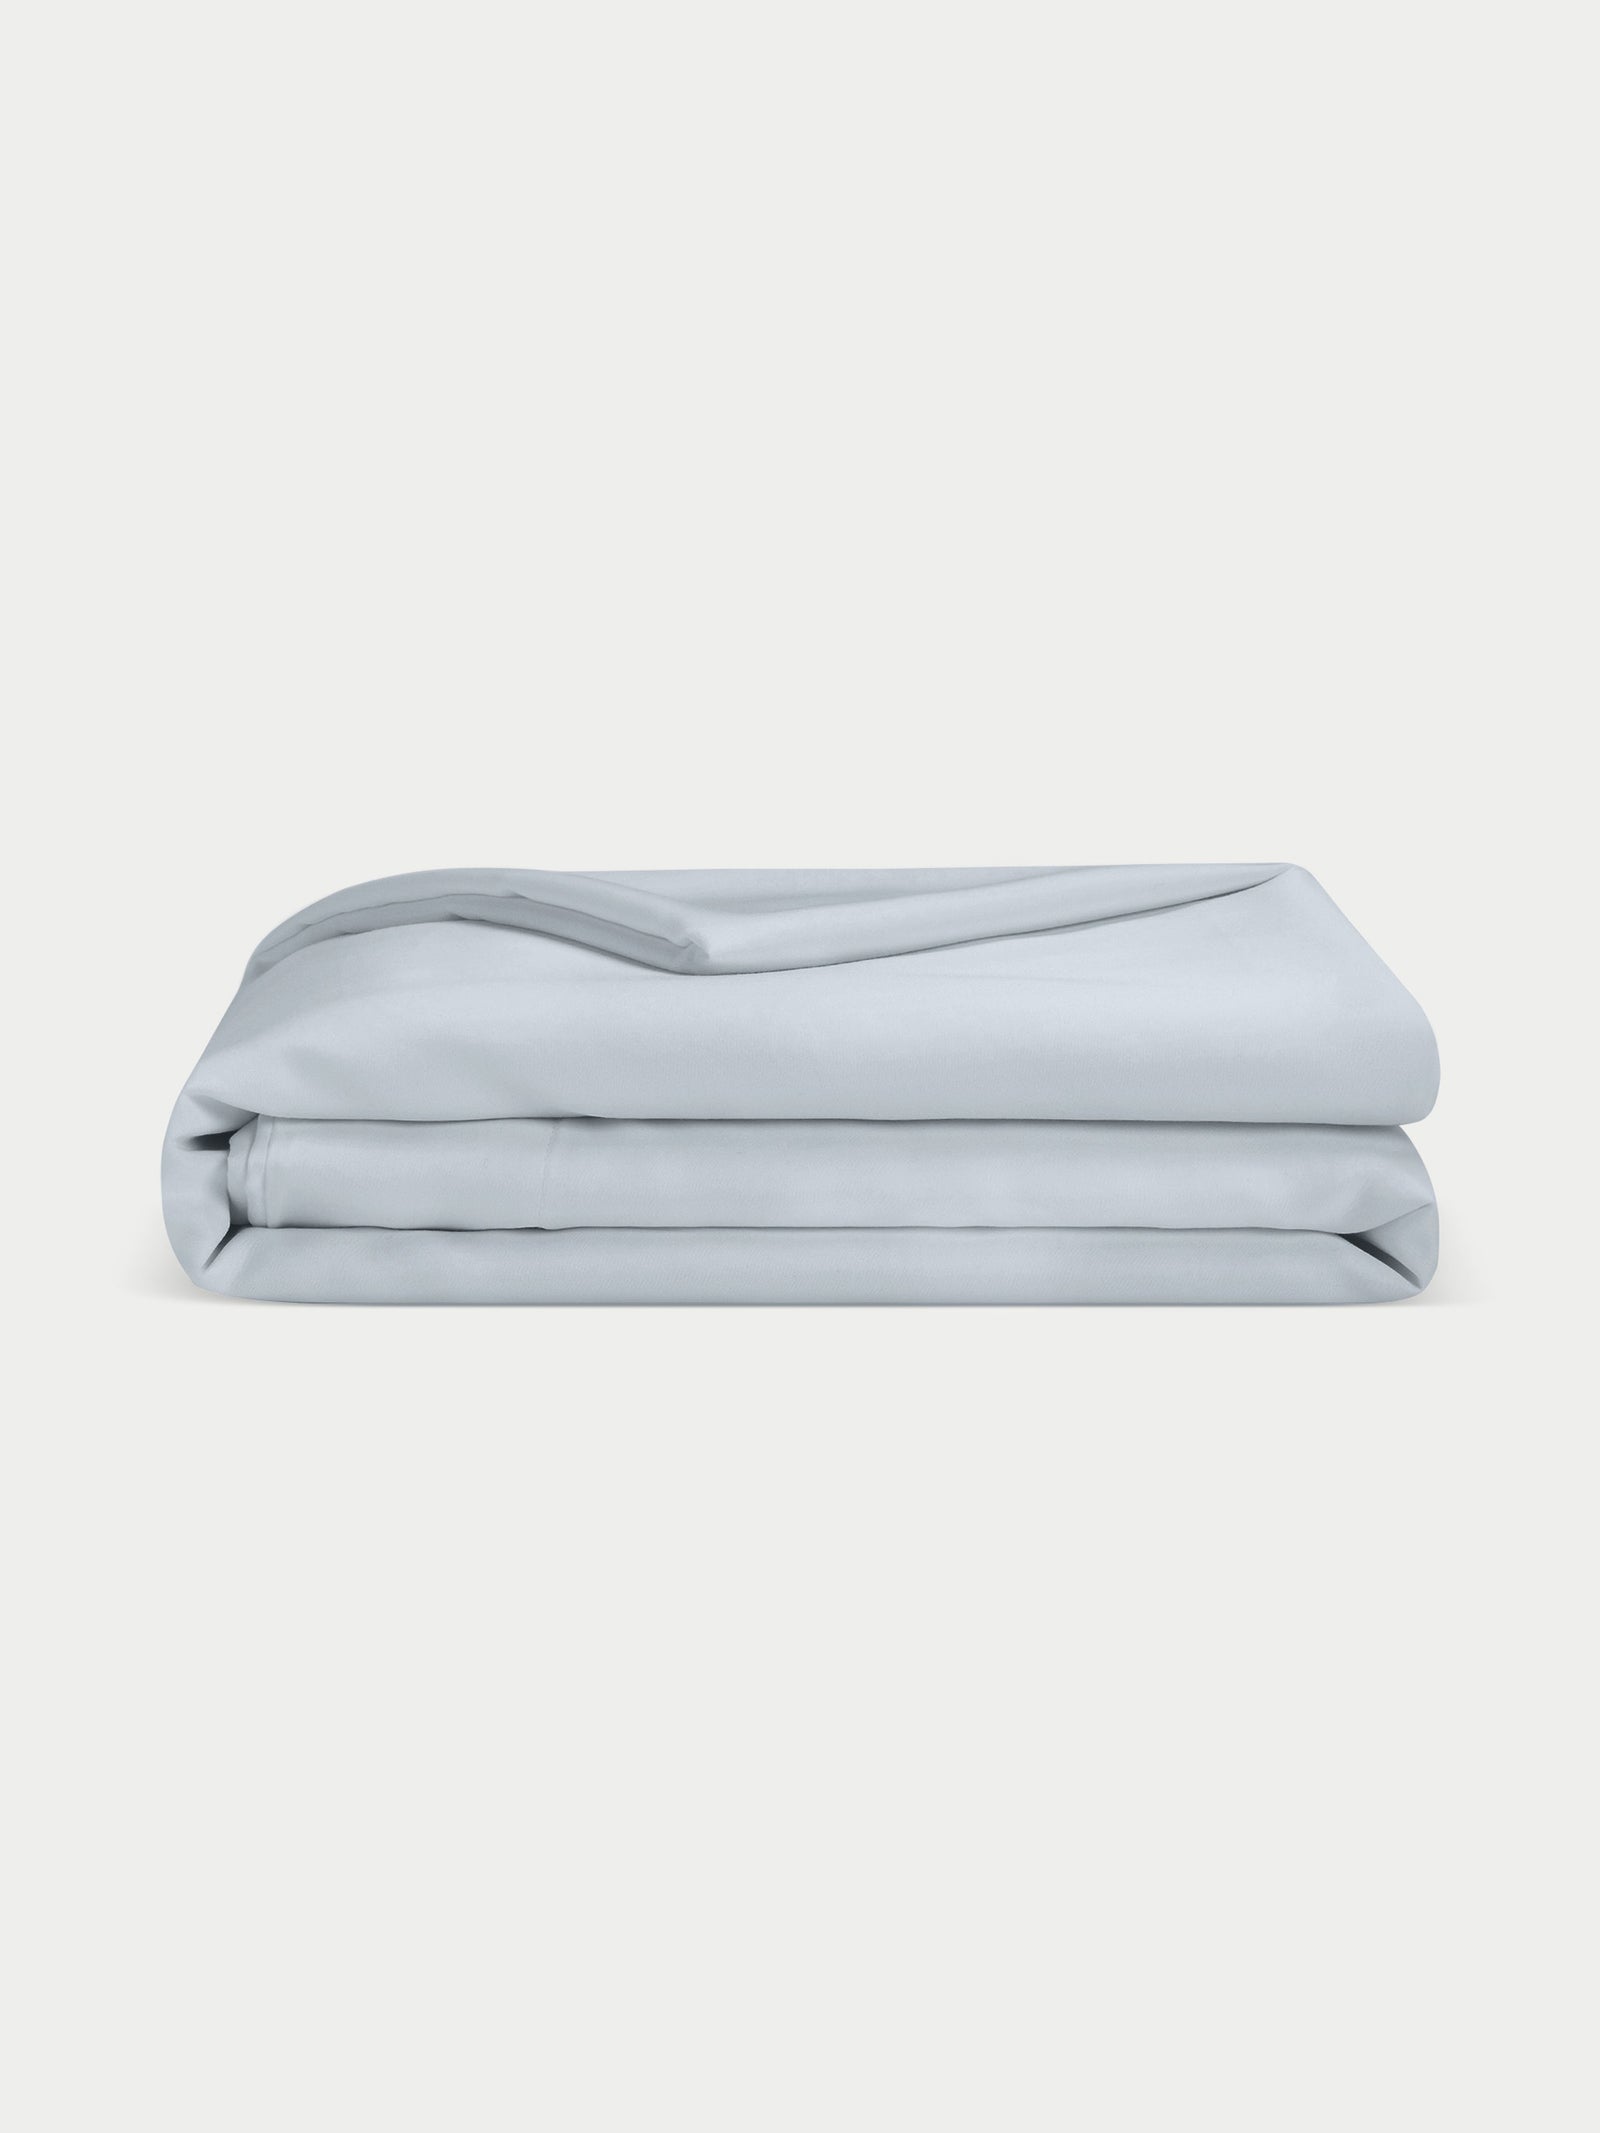 Shore duvet cover folded with white background 